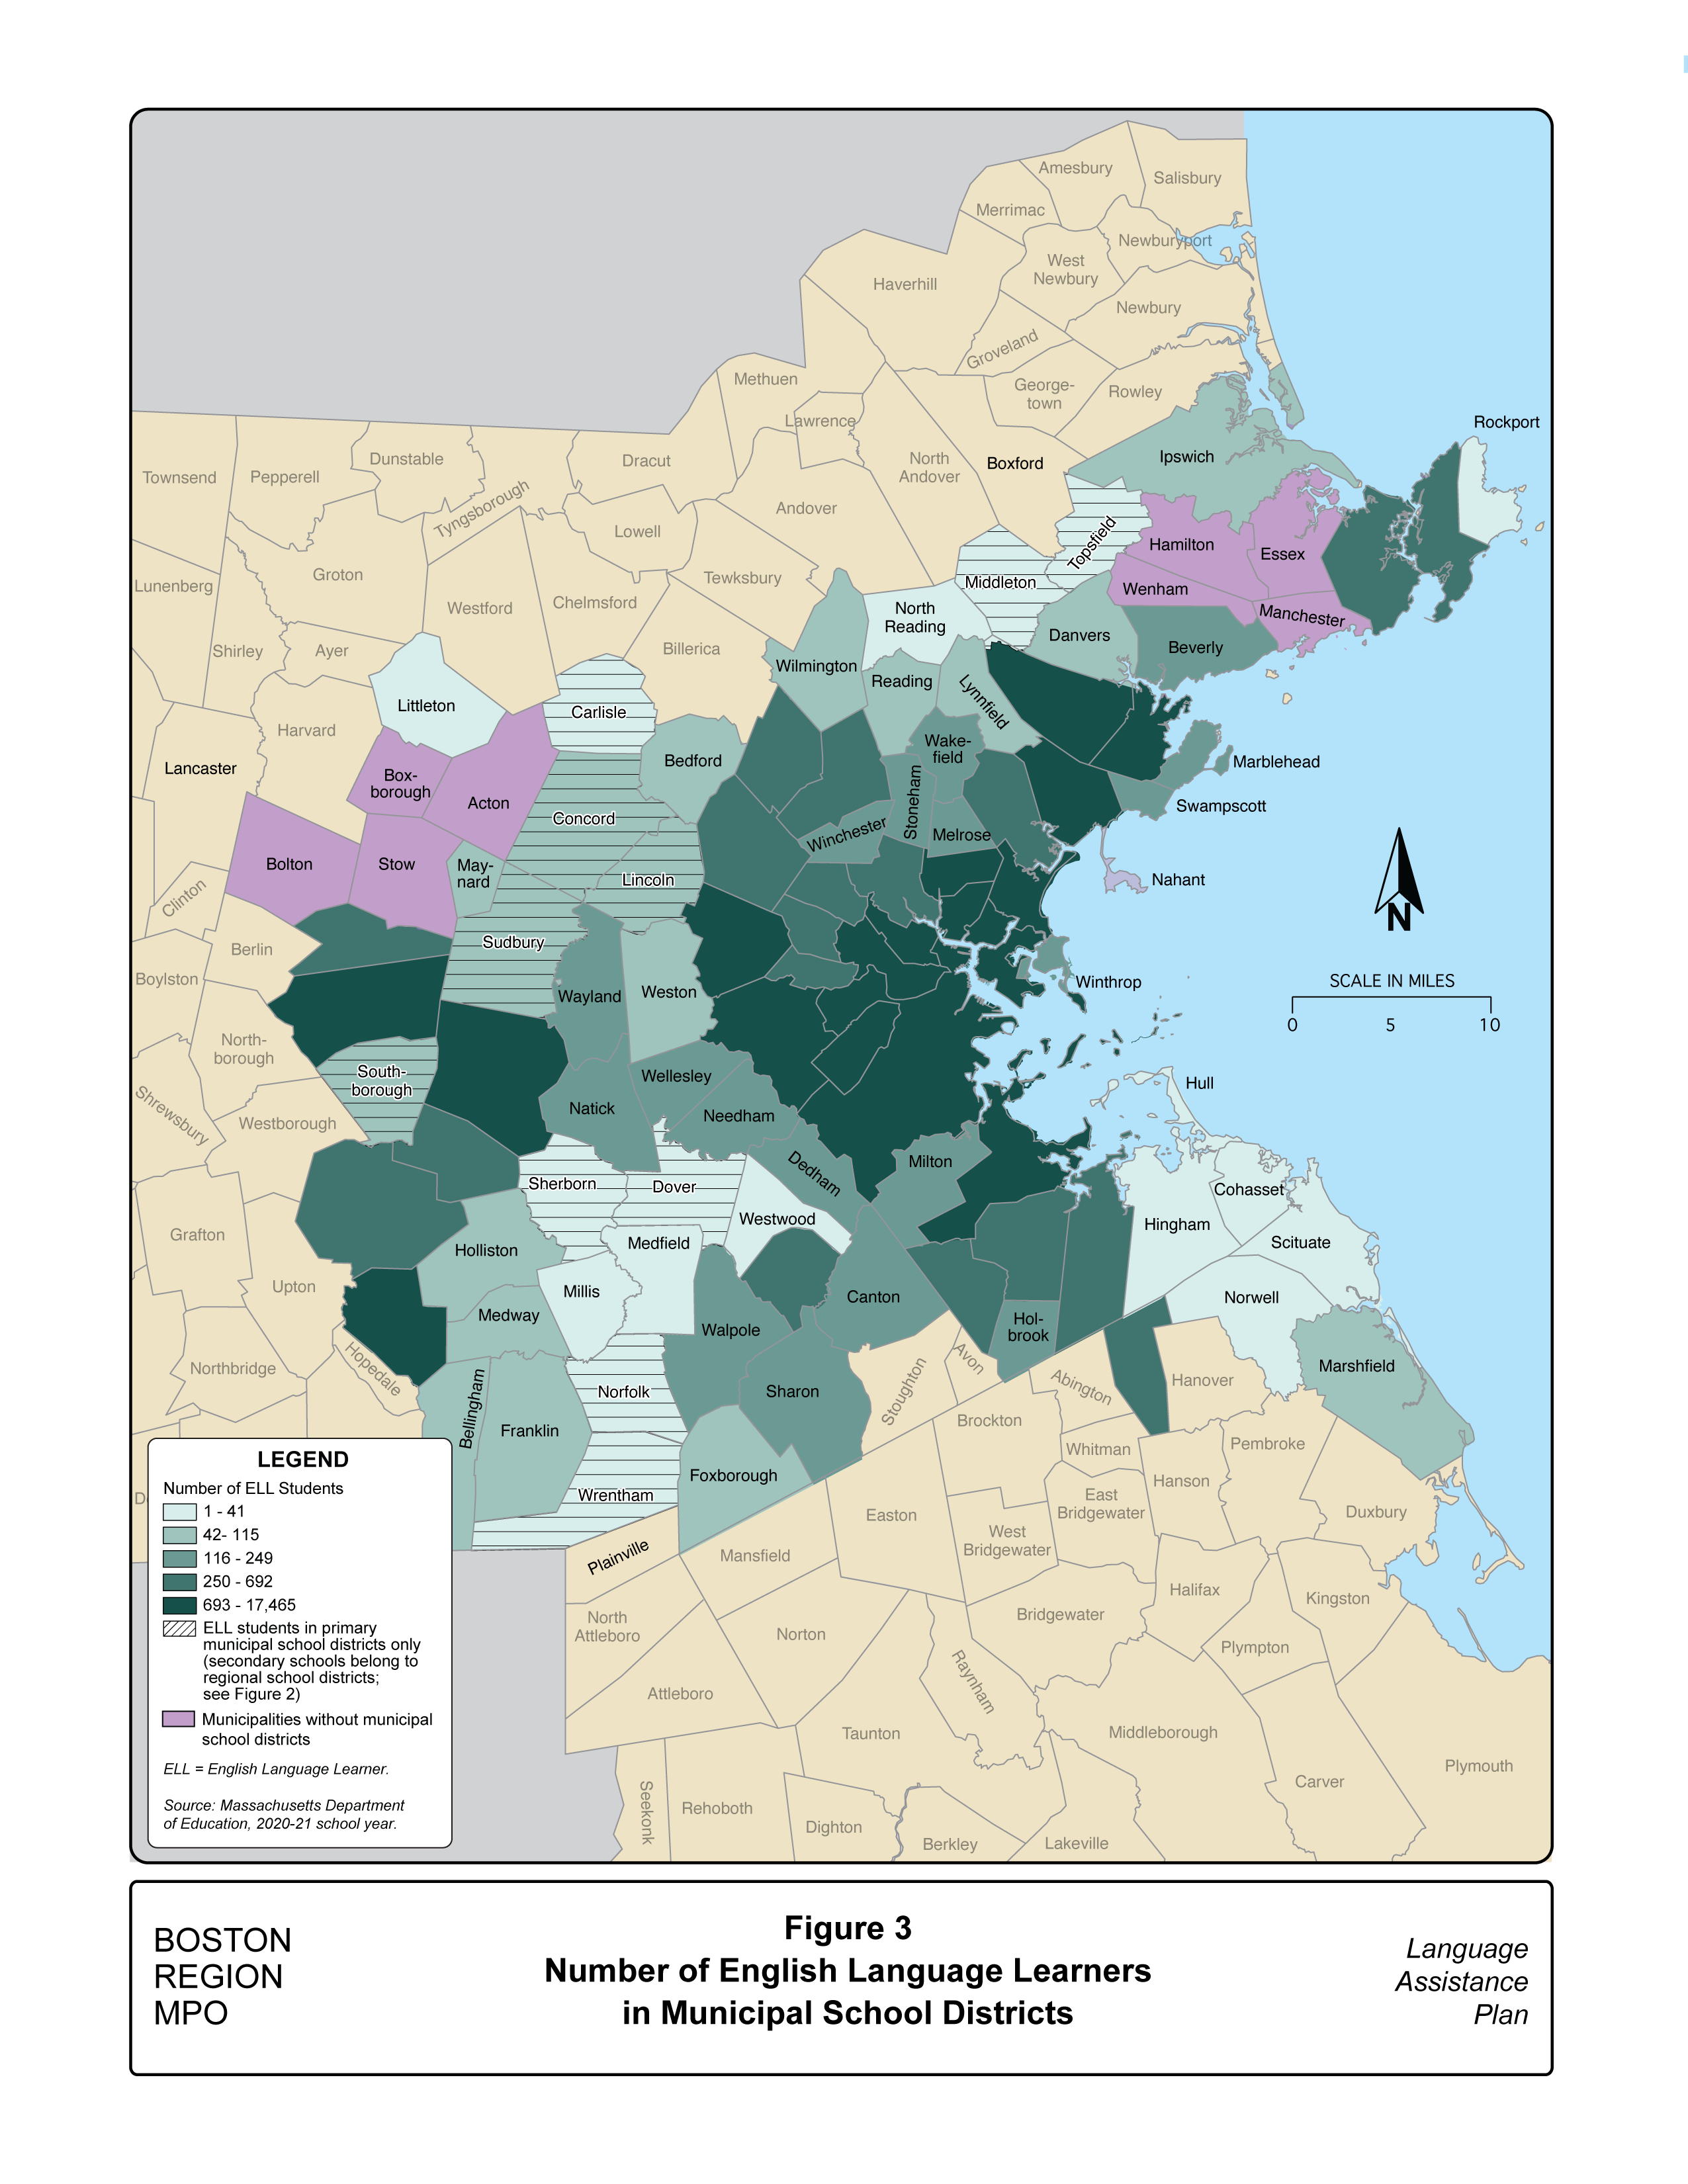 Figure 3 is a map showing the number of English language learners in municipal school districts in the Boston region for the 2020–21 academic year.